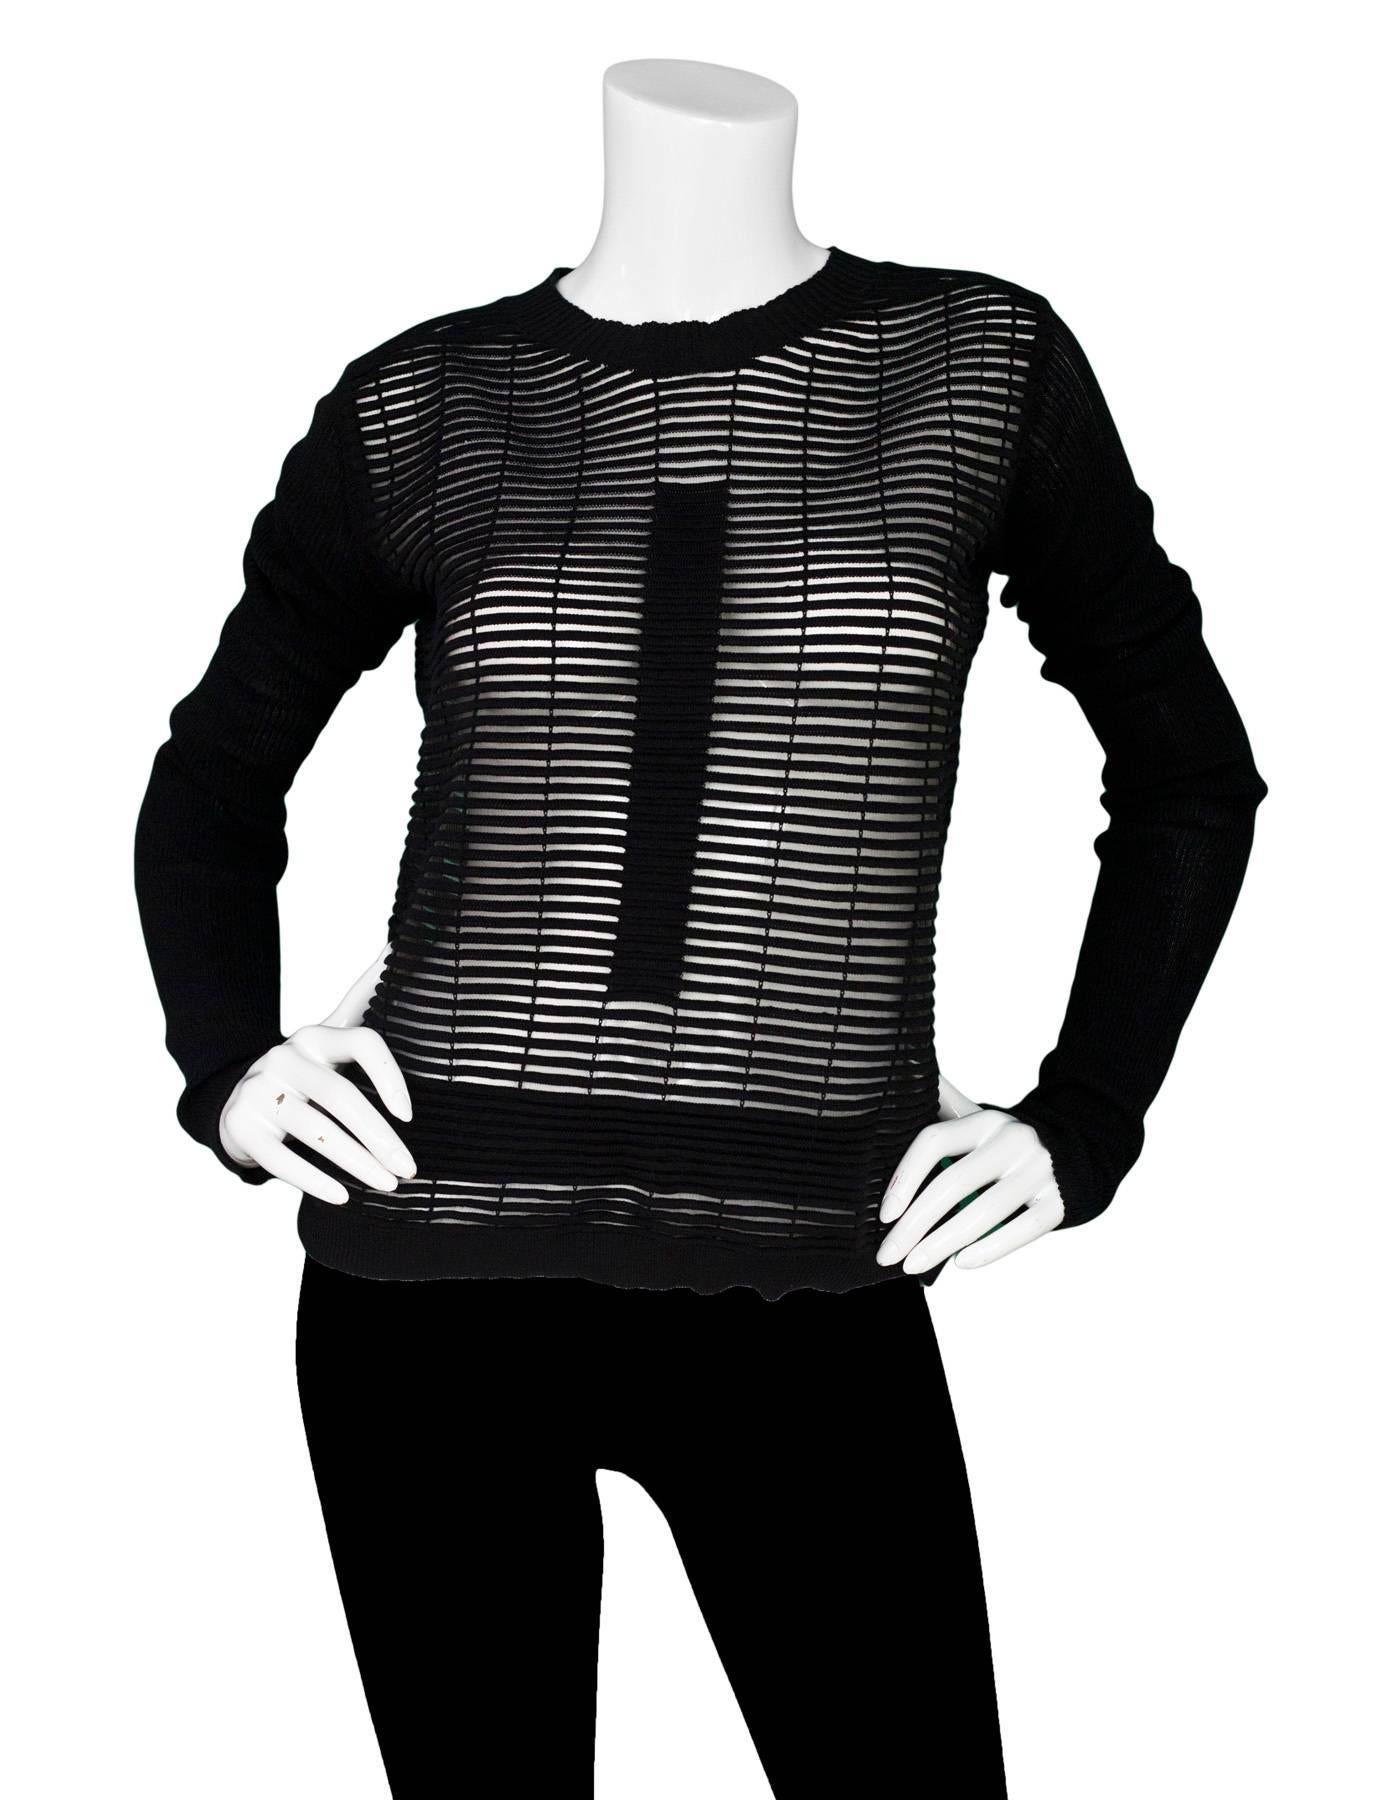 Rick Owens Black Mesh Stripe Top

Color: Black
Composition: Not listed, feels like nylon blend
Lining: None
Closure/Opening: Pull over
Overall Condition: Excellent pre-owned condition, minor stretching at arm opening
Marked Size: Not listed, refer